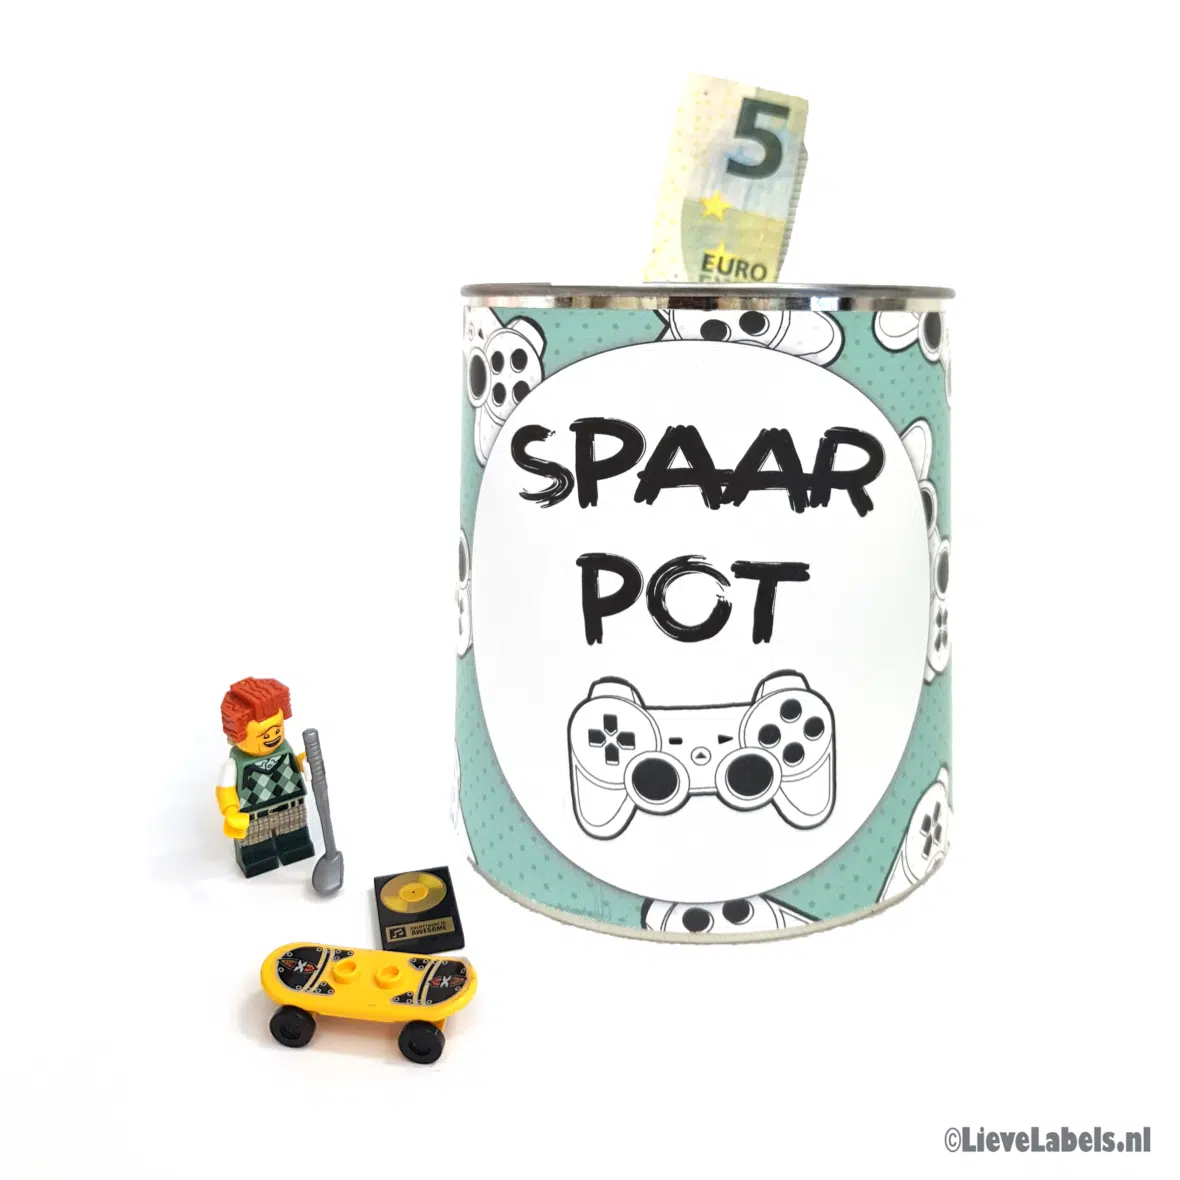 SpaarpotGame3